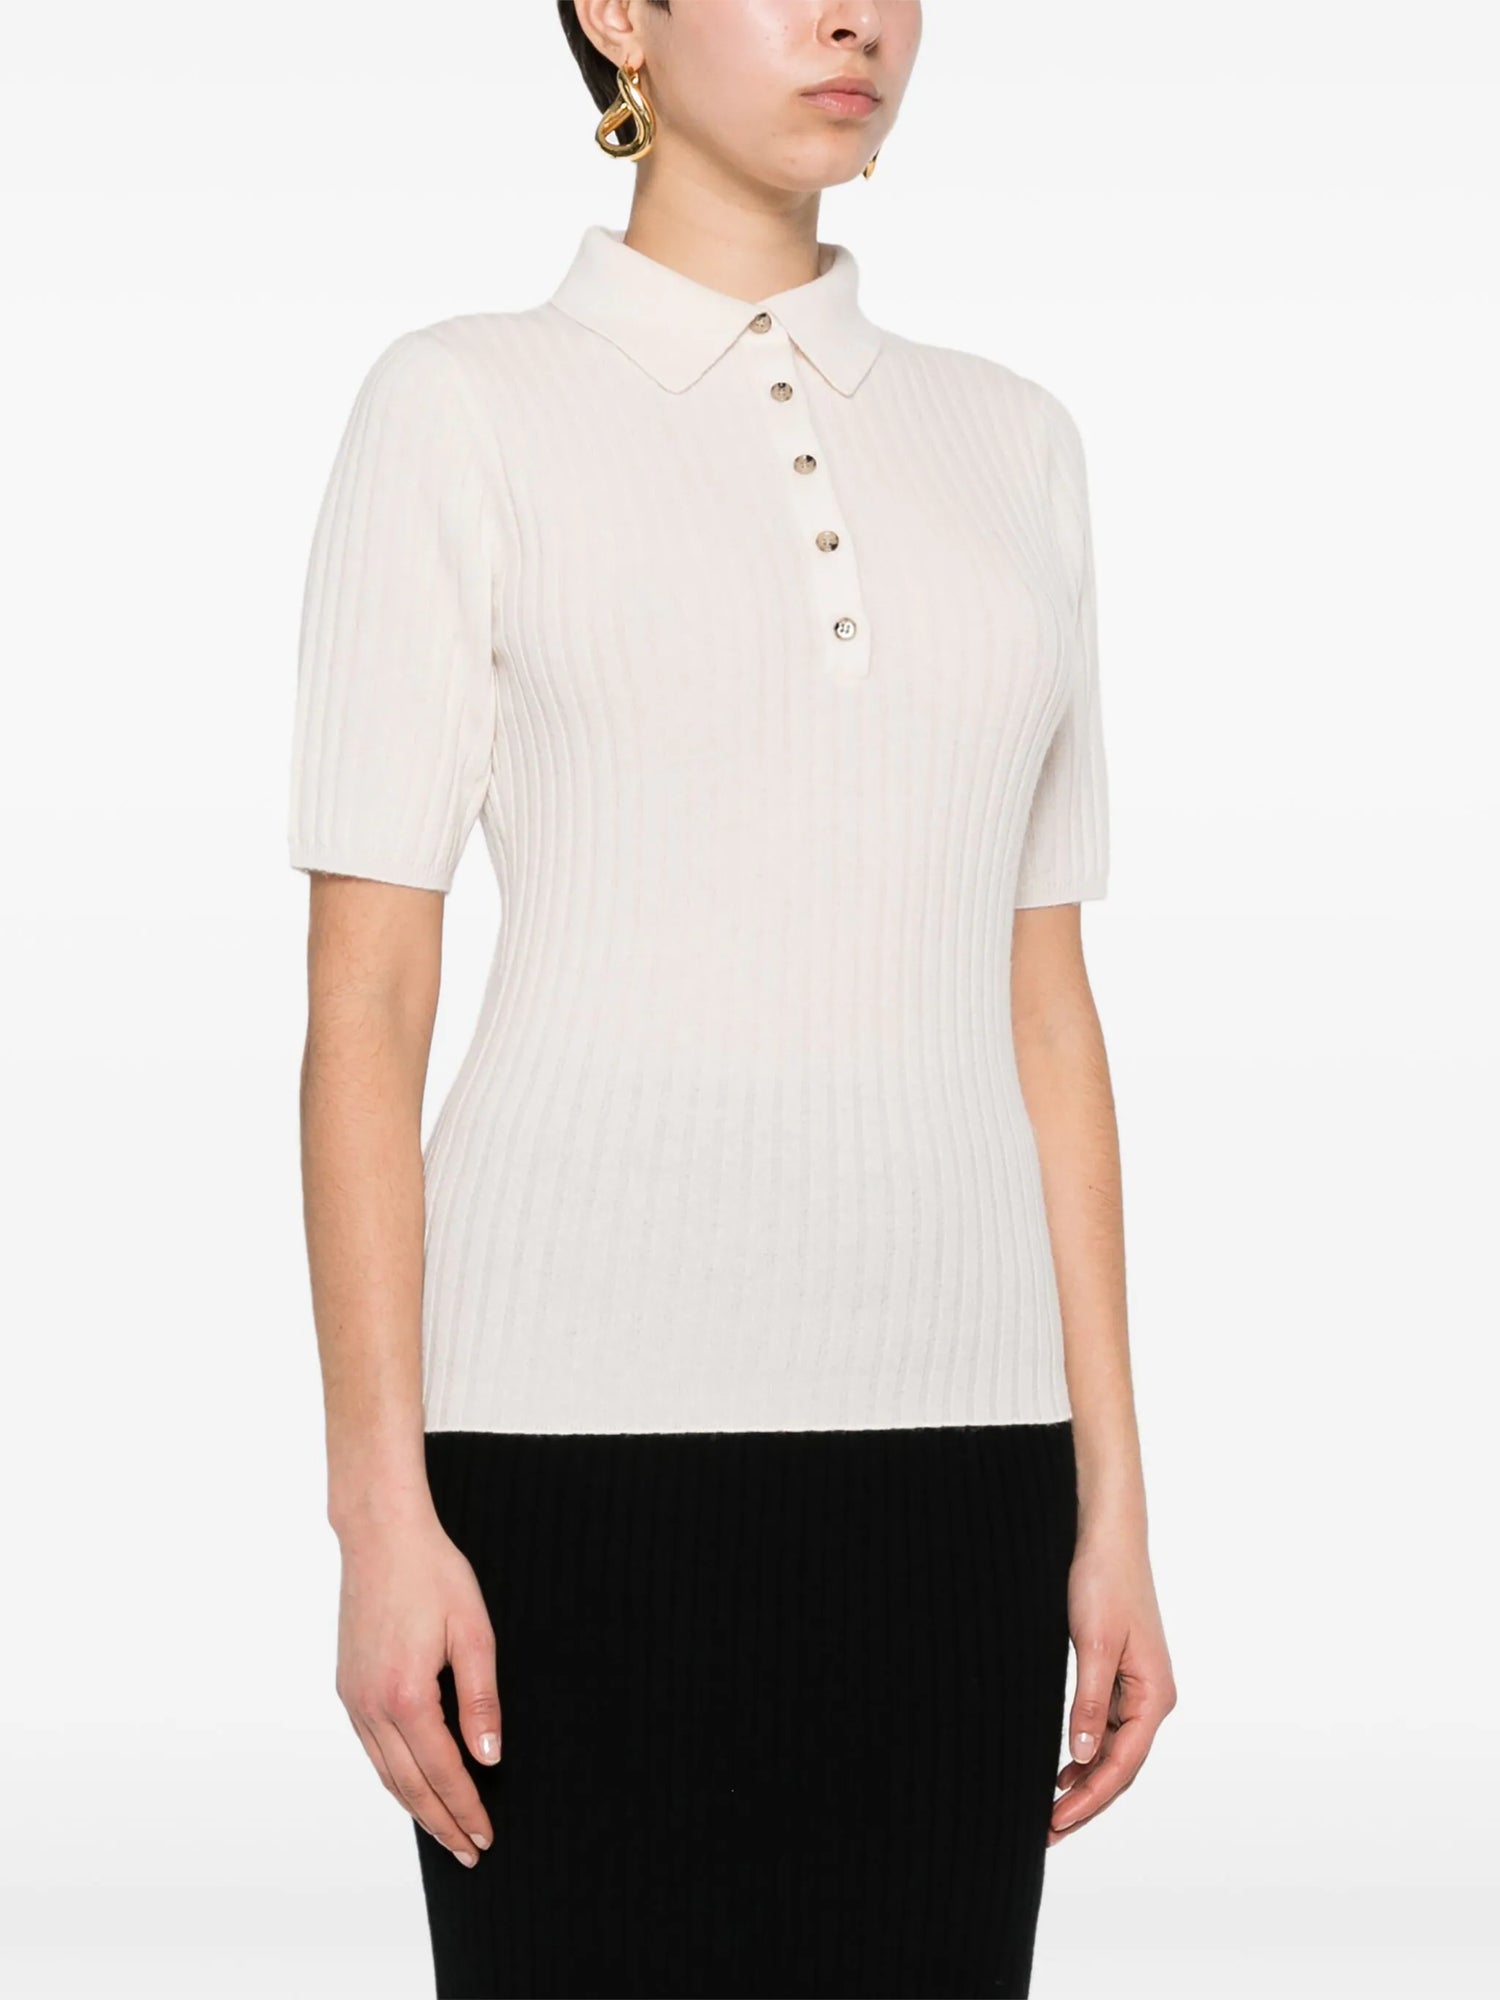 Poloneck cashmere sweater, ivory